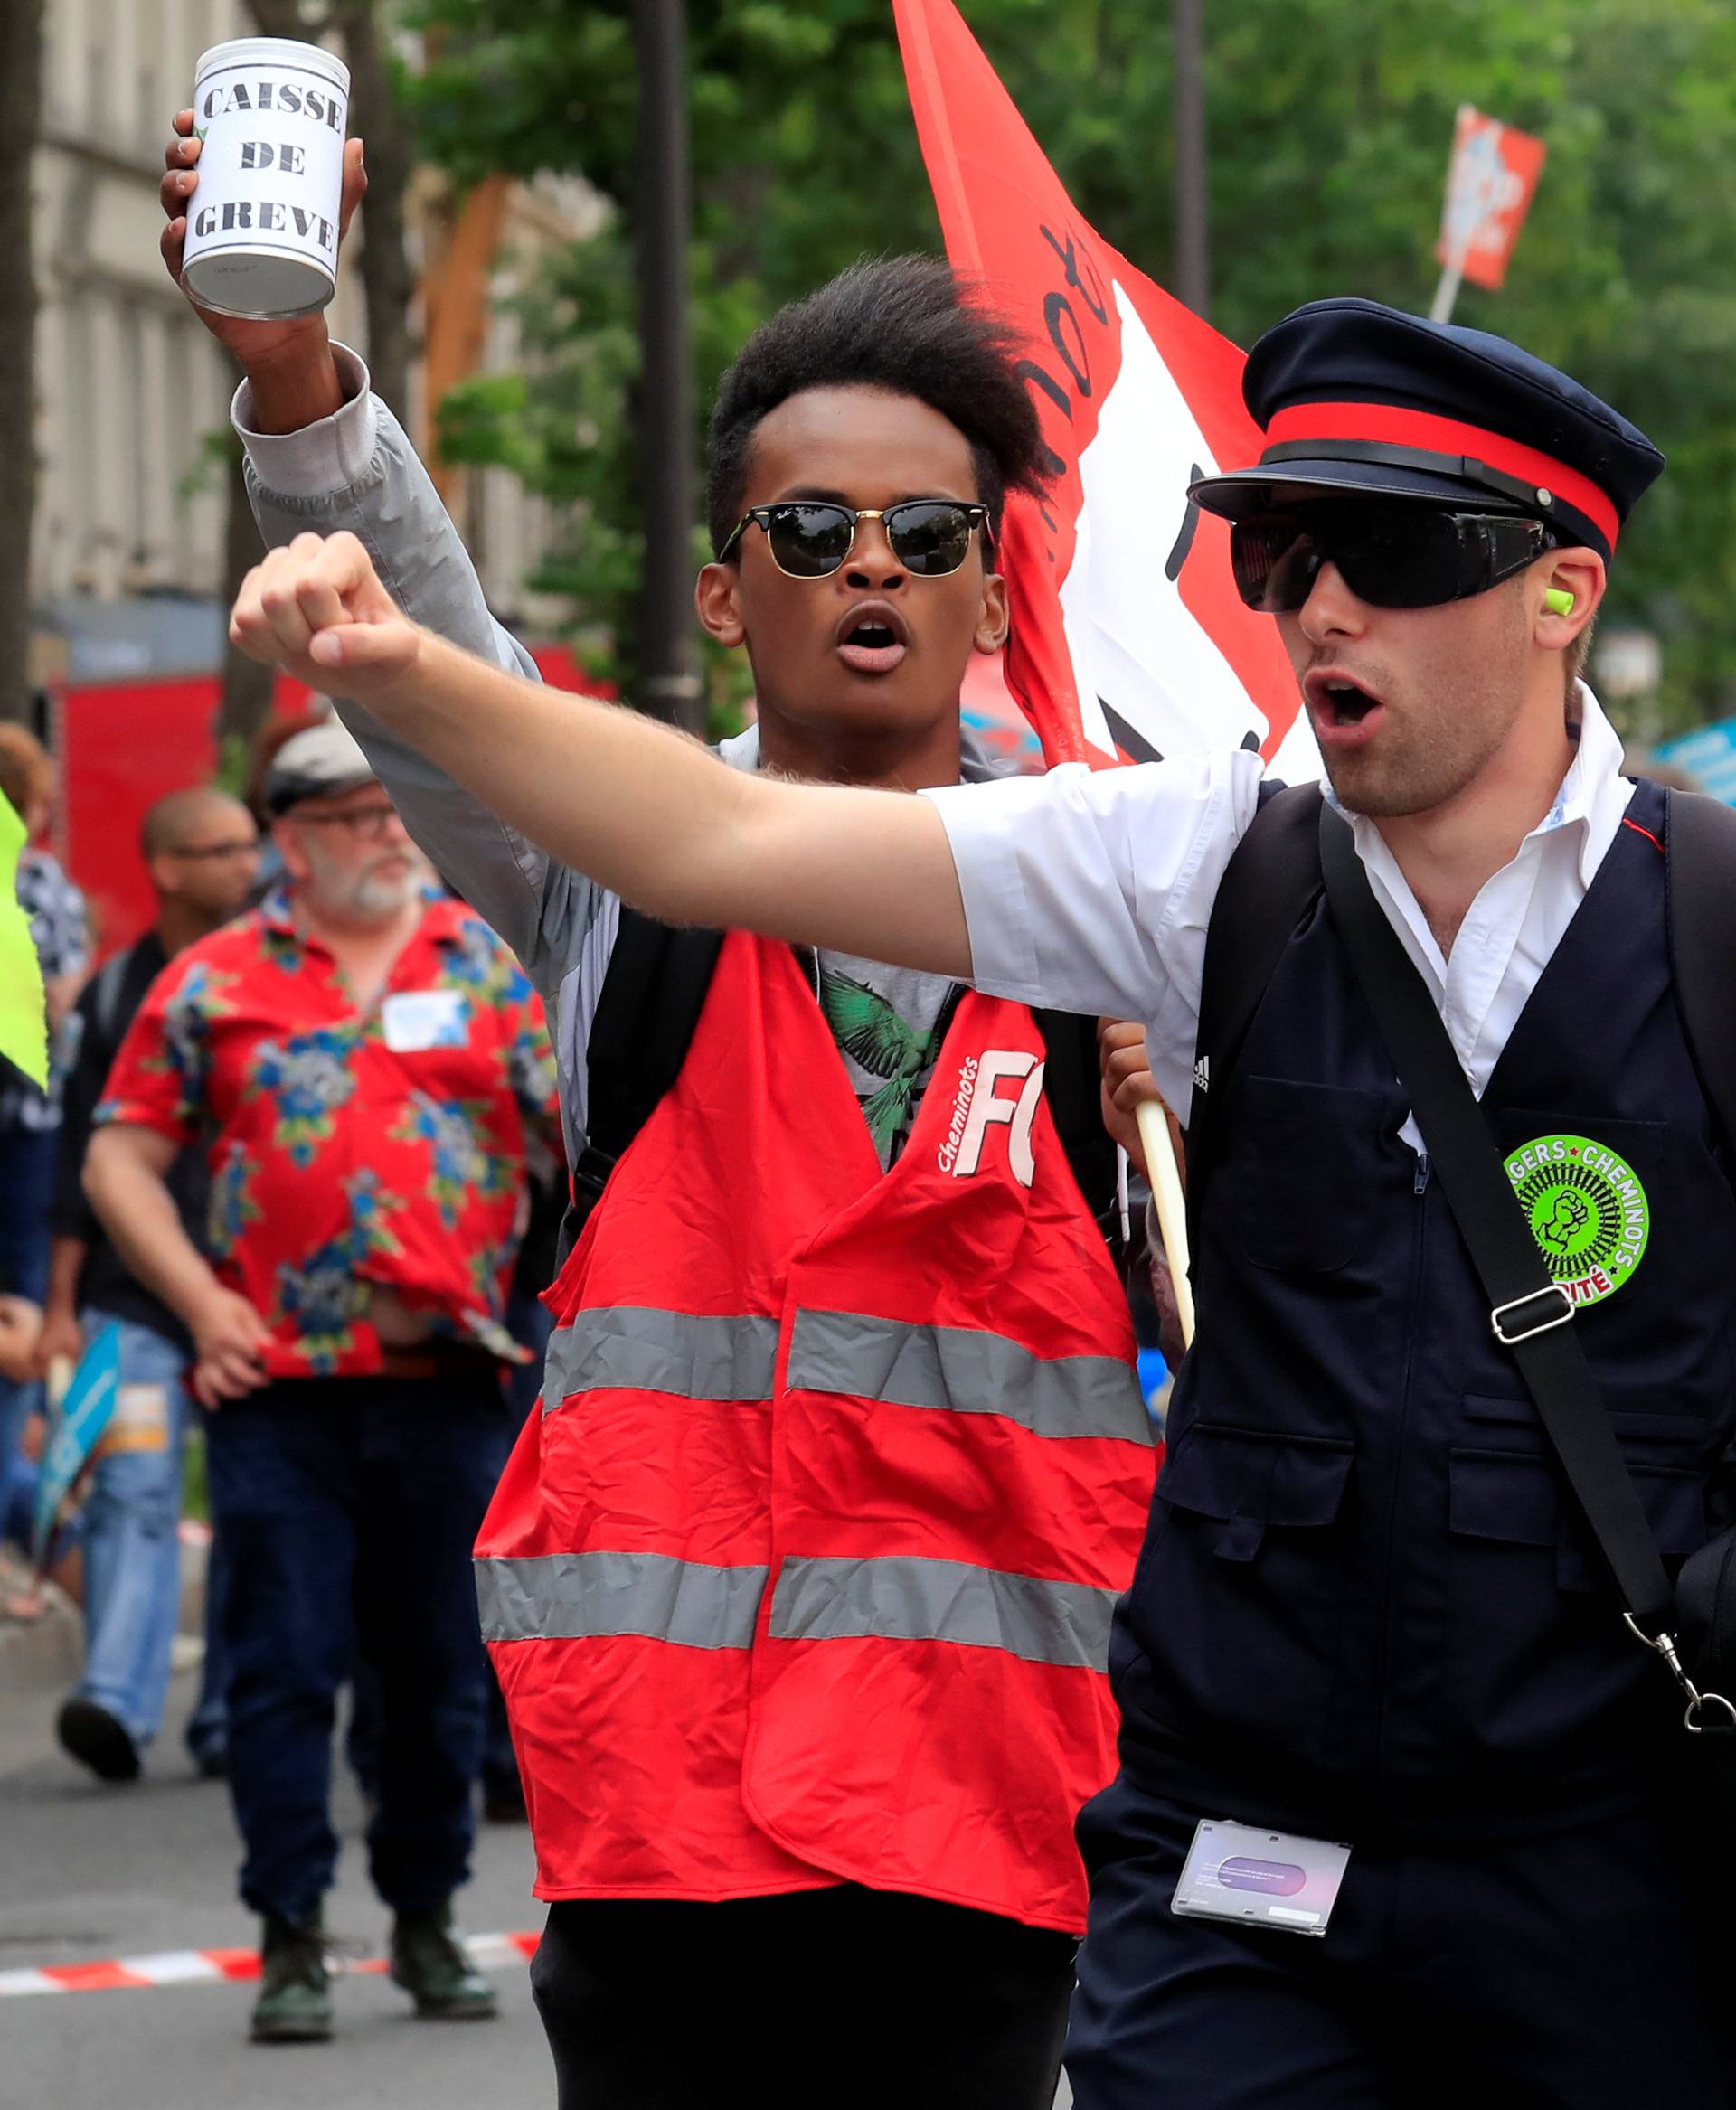 Protesters shout slogans during a demonstration by French unions and France Insoumise" (France Unbowed) political party to protest against government reforms, in Paris